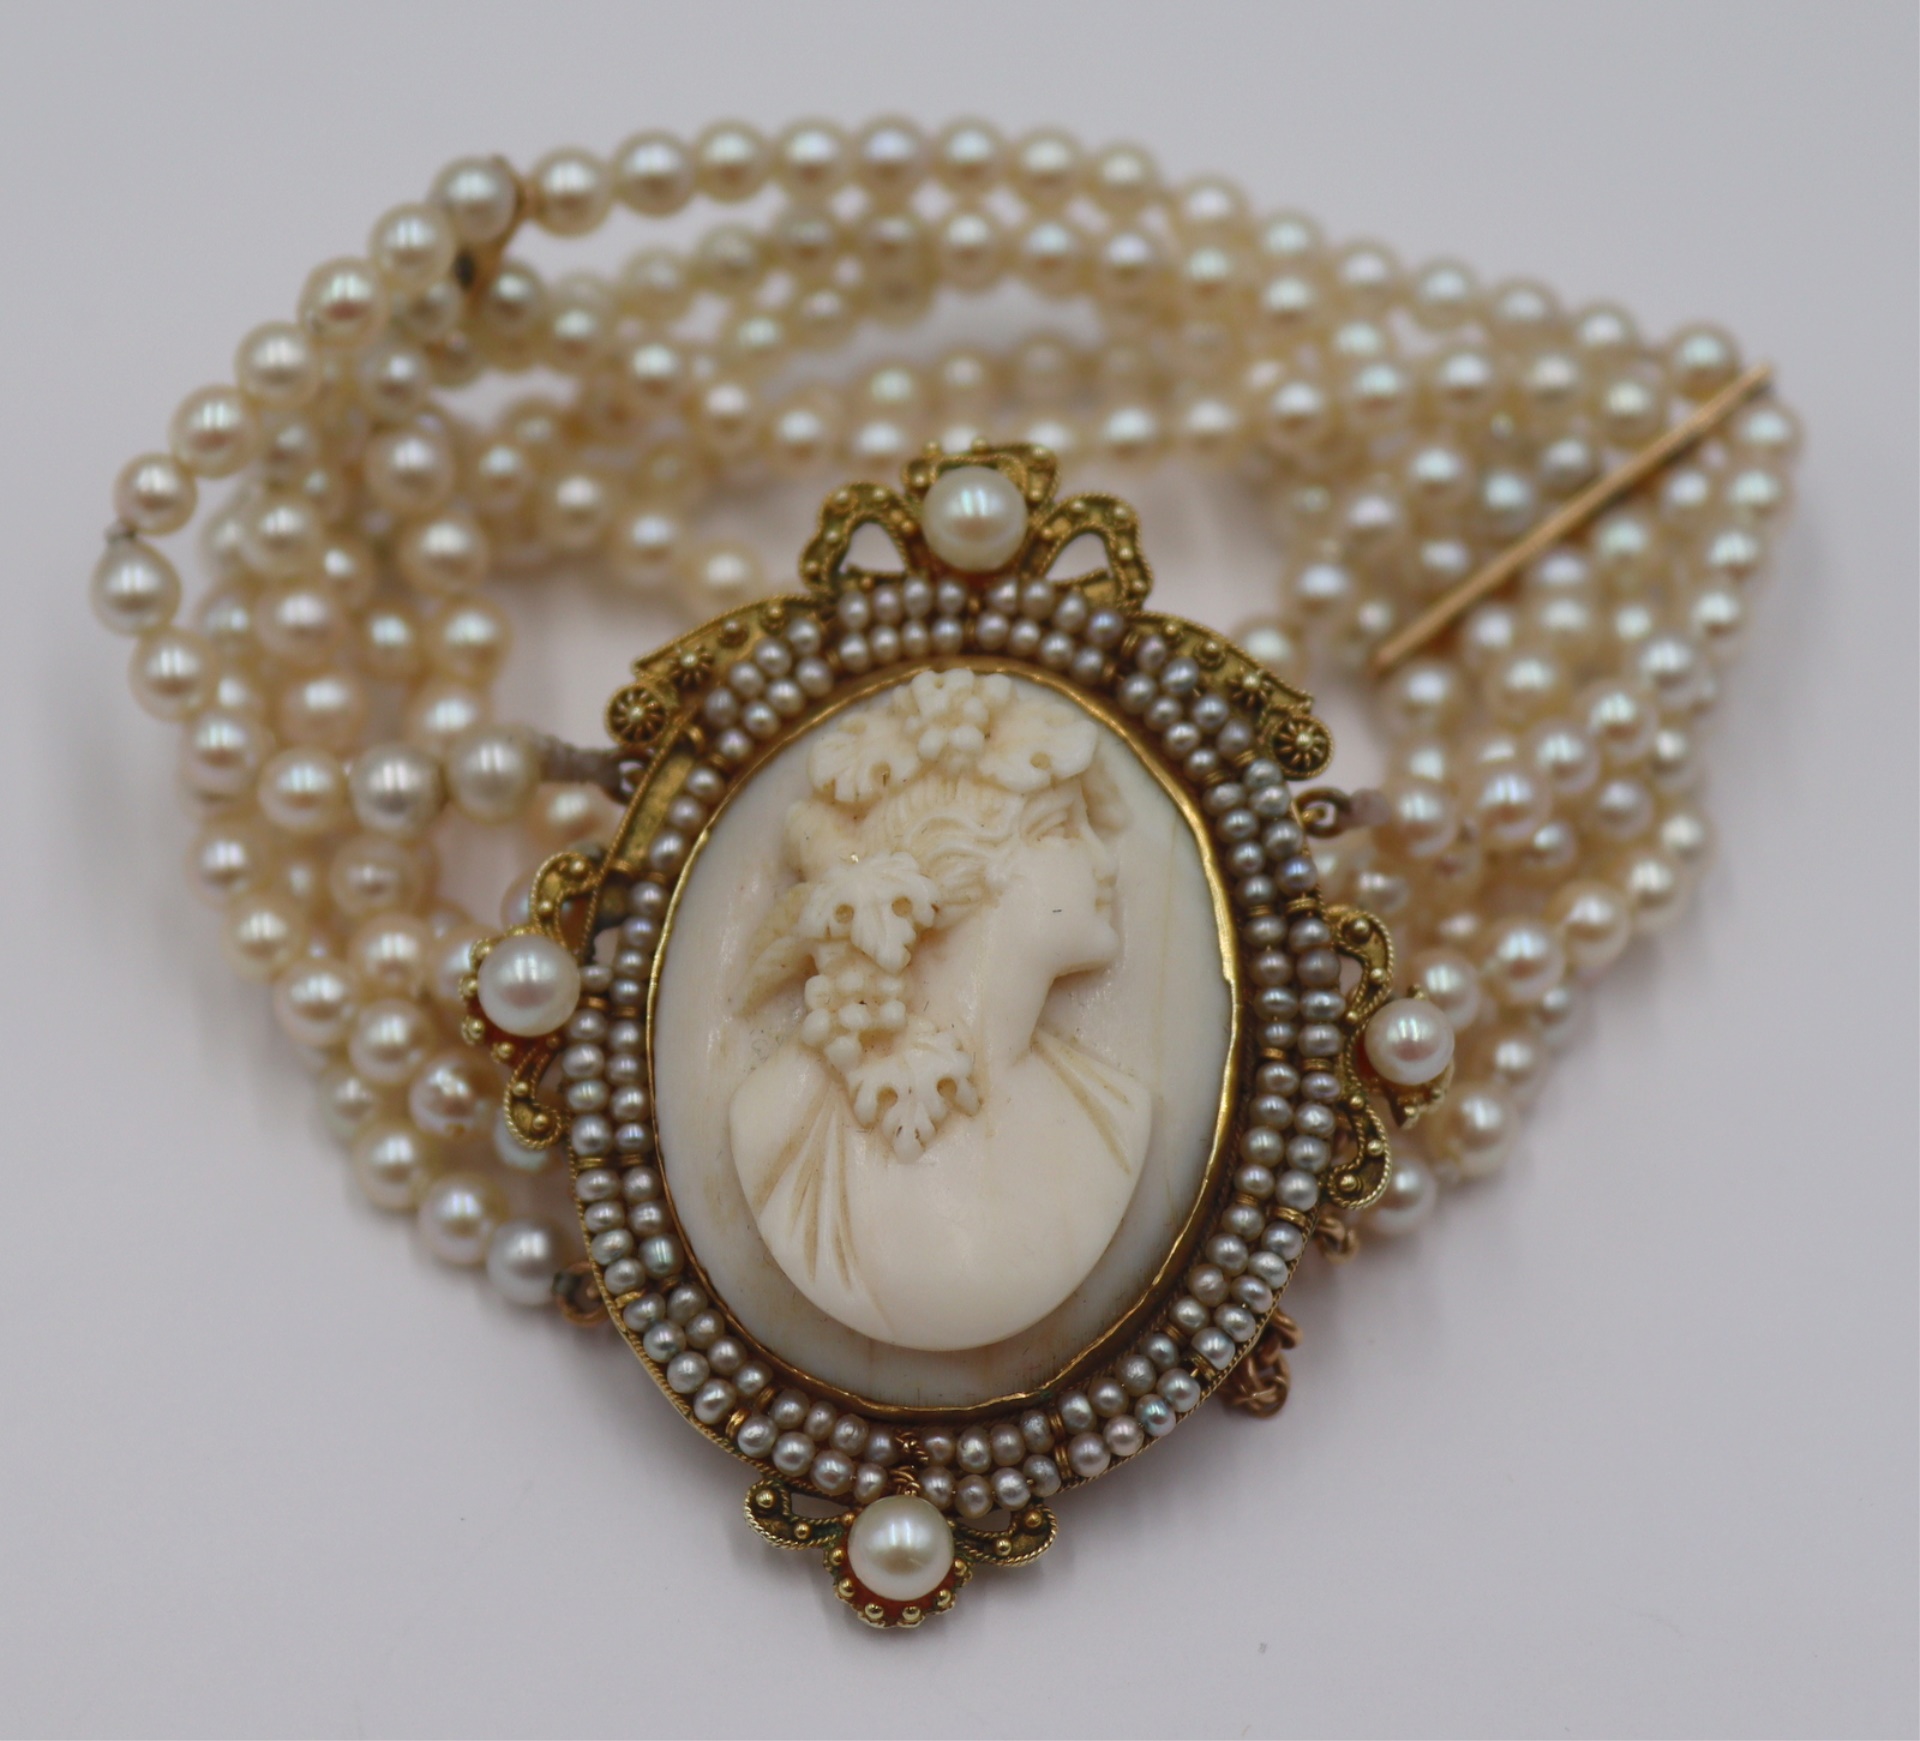 JEWELRY 14KT GOLD PEARL AND CAMEO 3bb04b